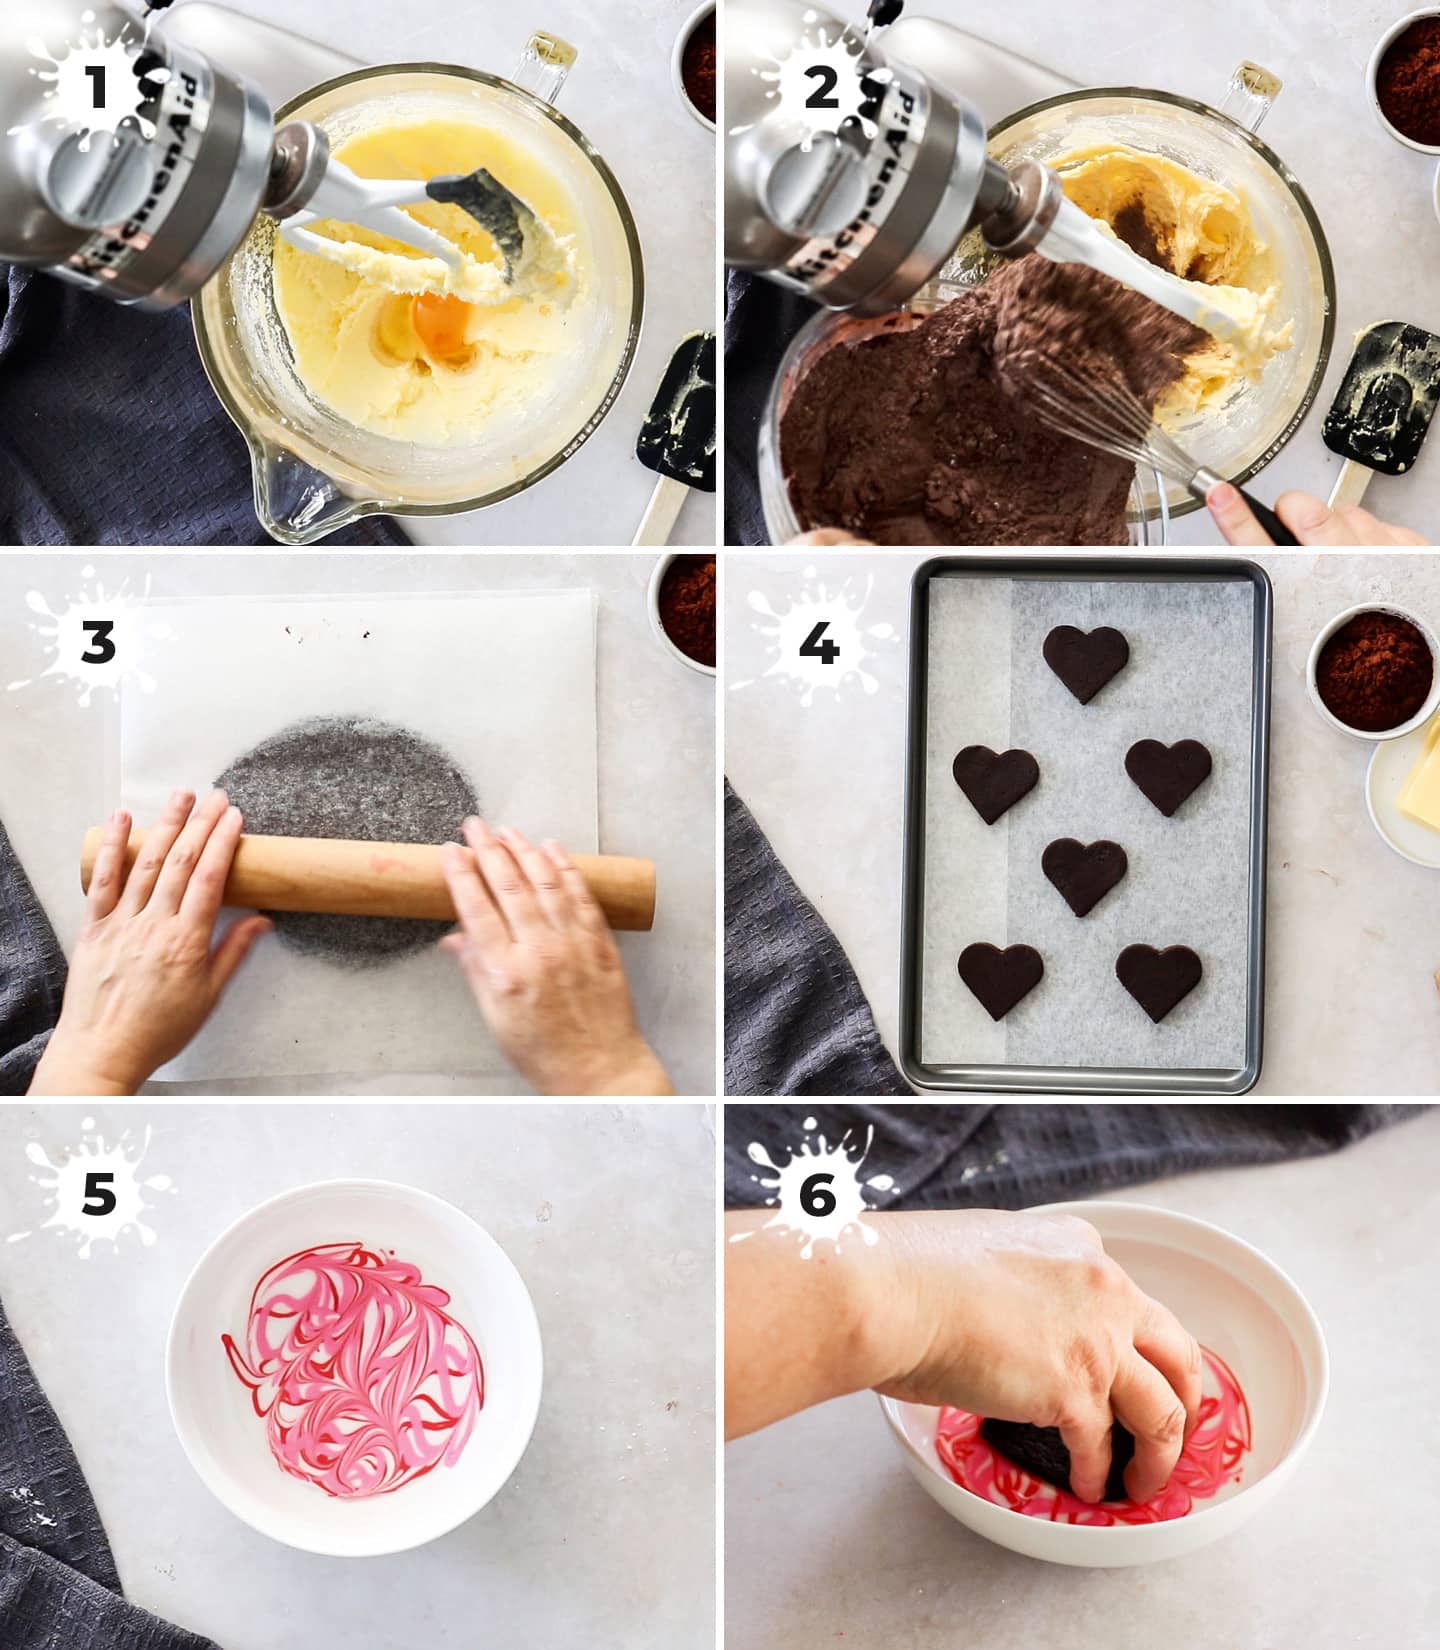 A collage of 6 images showing how to make chocolate sugar cookies.